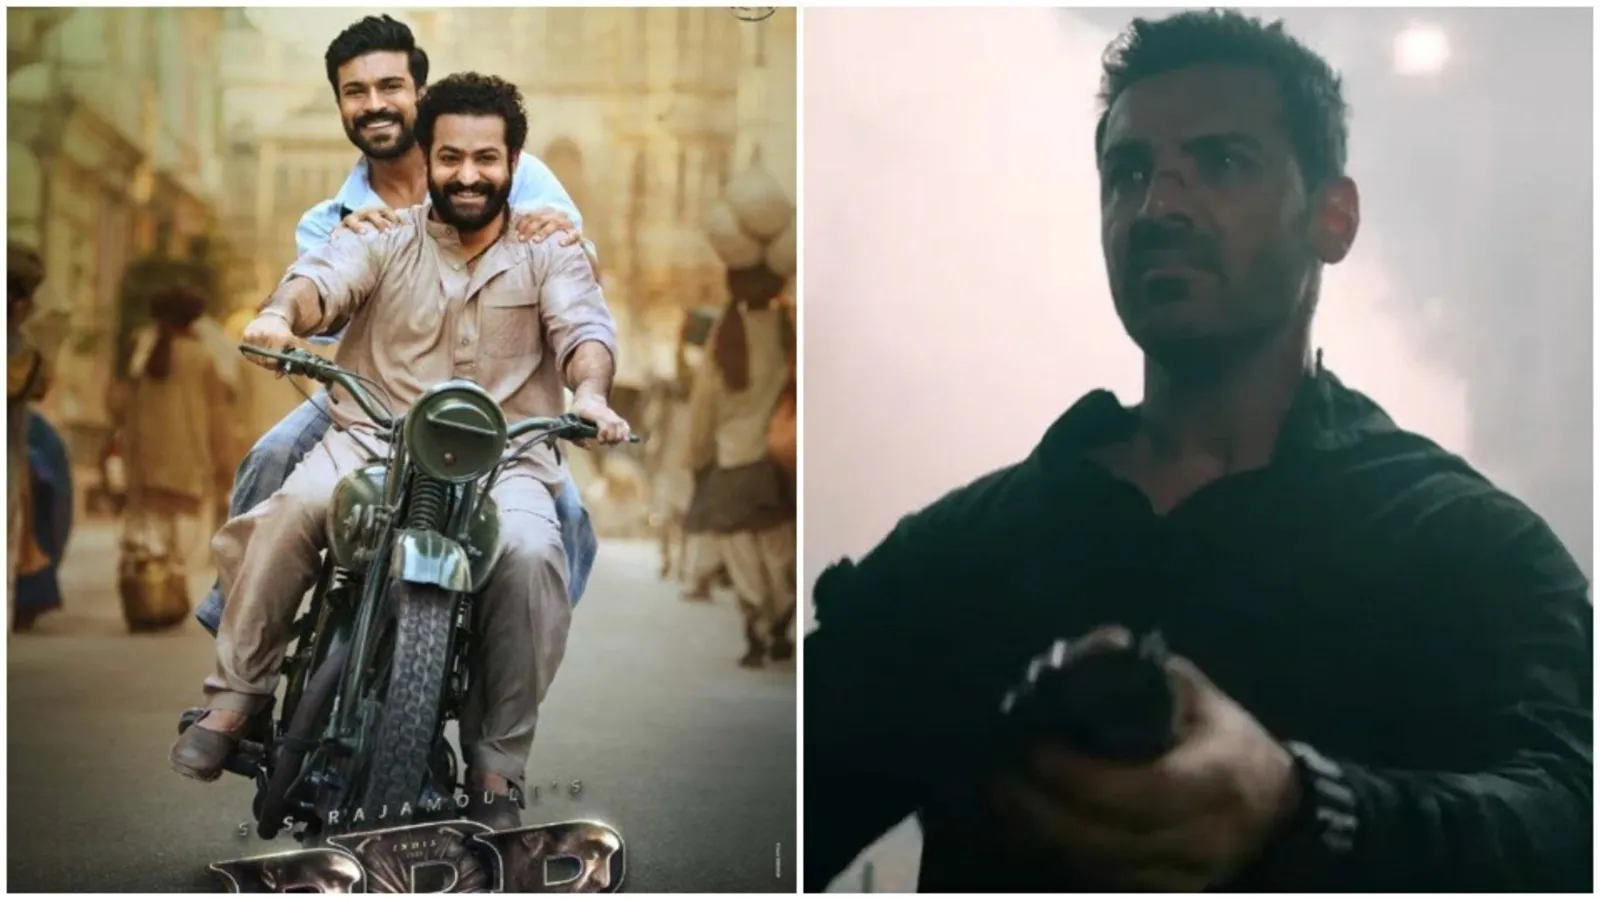 Attack box office collection day 1: John Abraham film gets poor opening of ₹3 cr, RRR’s reign continues unchallenged